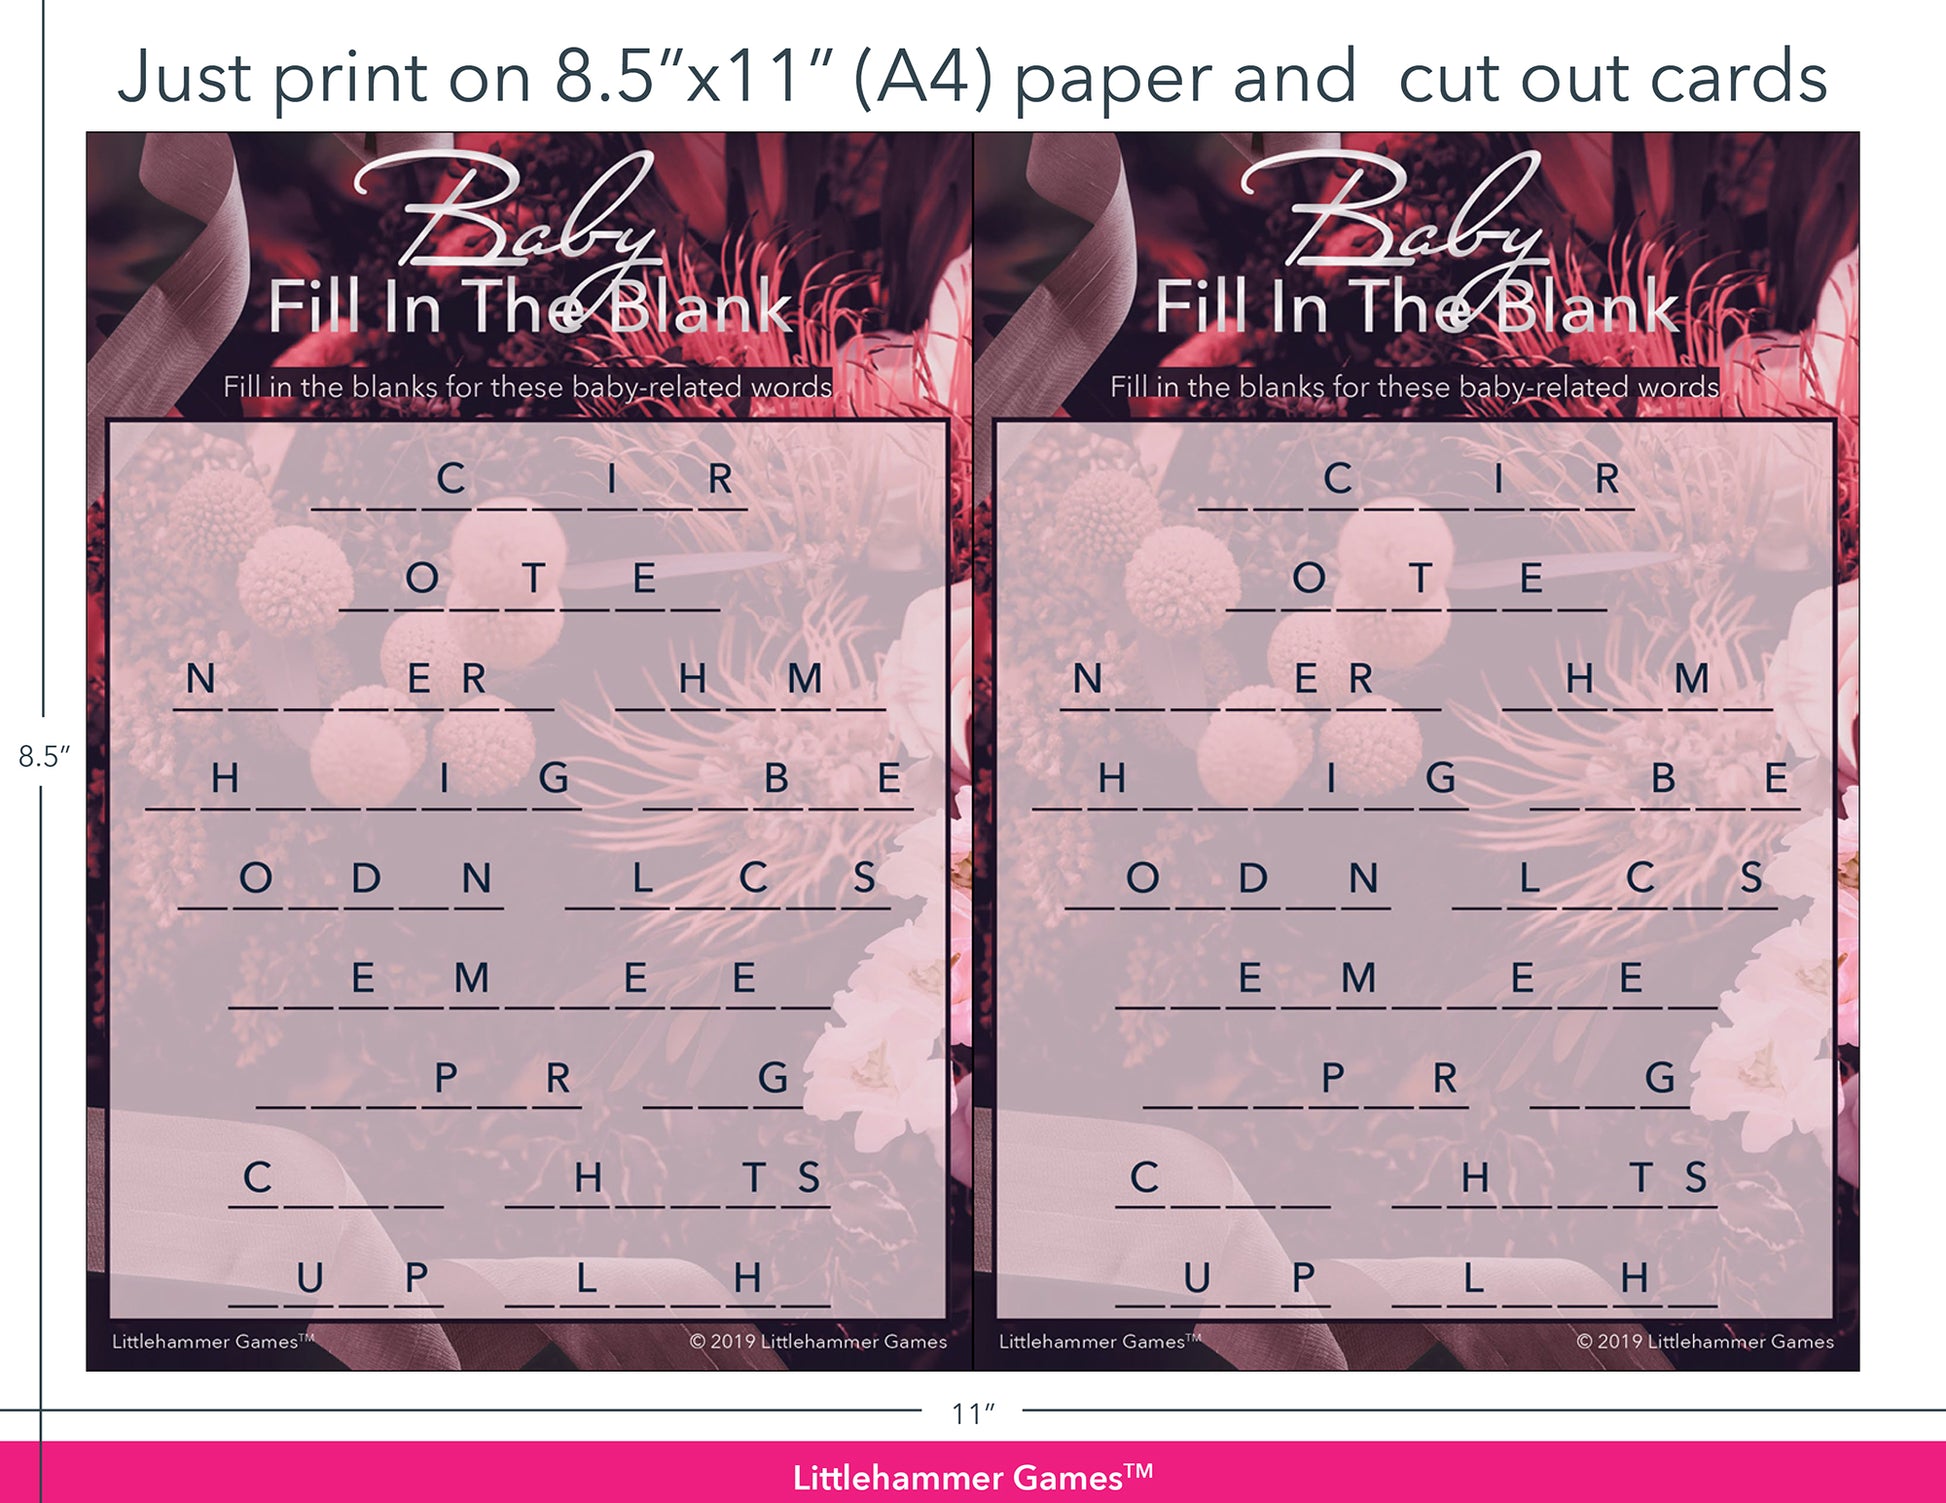 Baby Fill in the Blank floral game cards with printing instructions